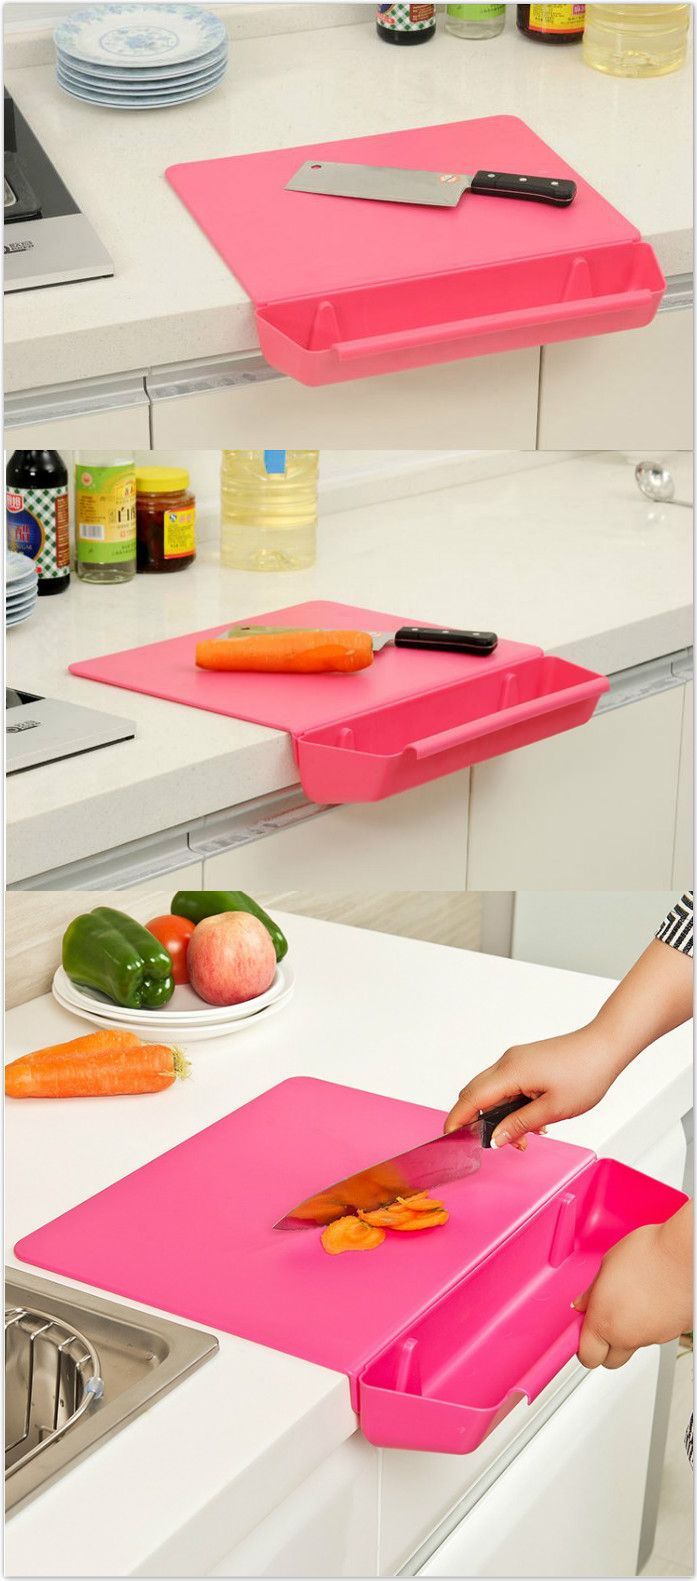 2-in-1 Creative Cutting Board with Detachable Storage Box. #kitchen_gadgets